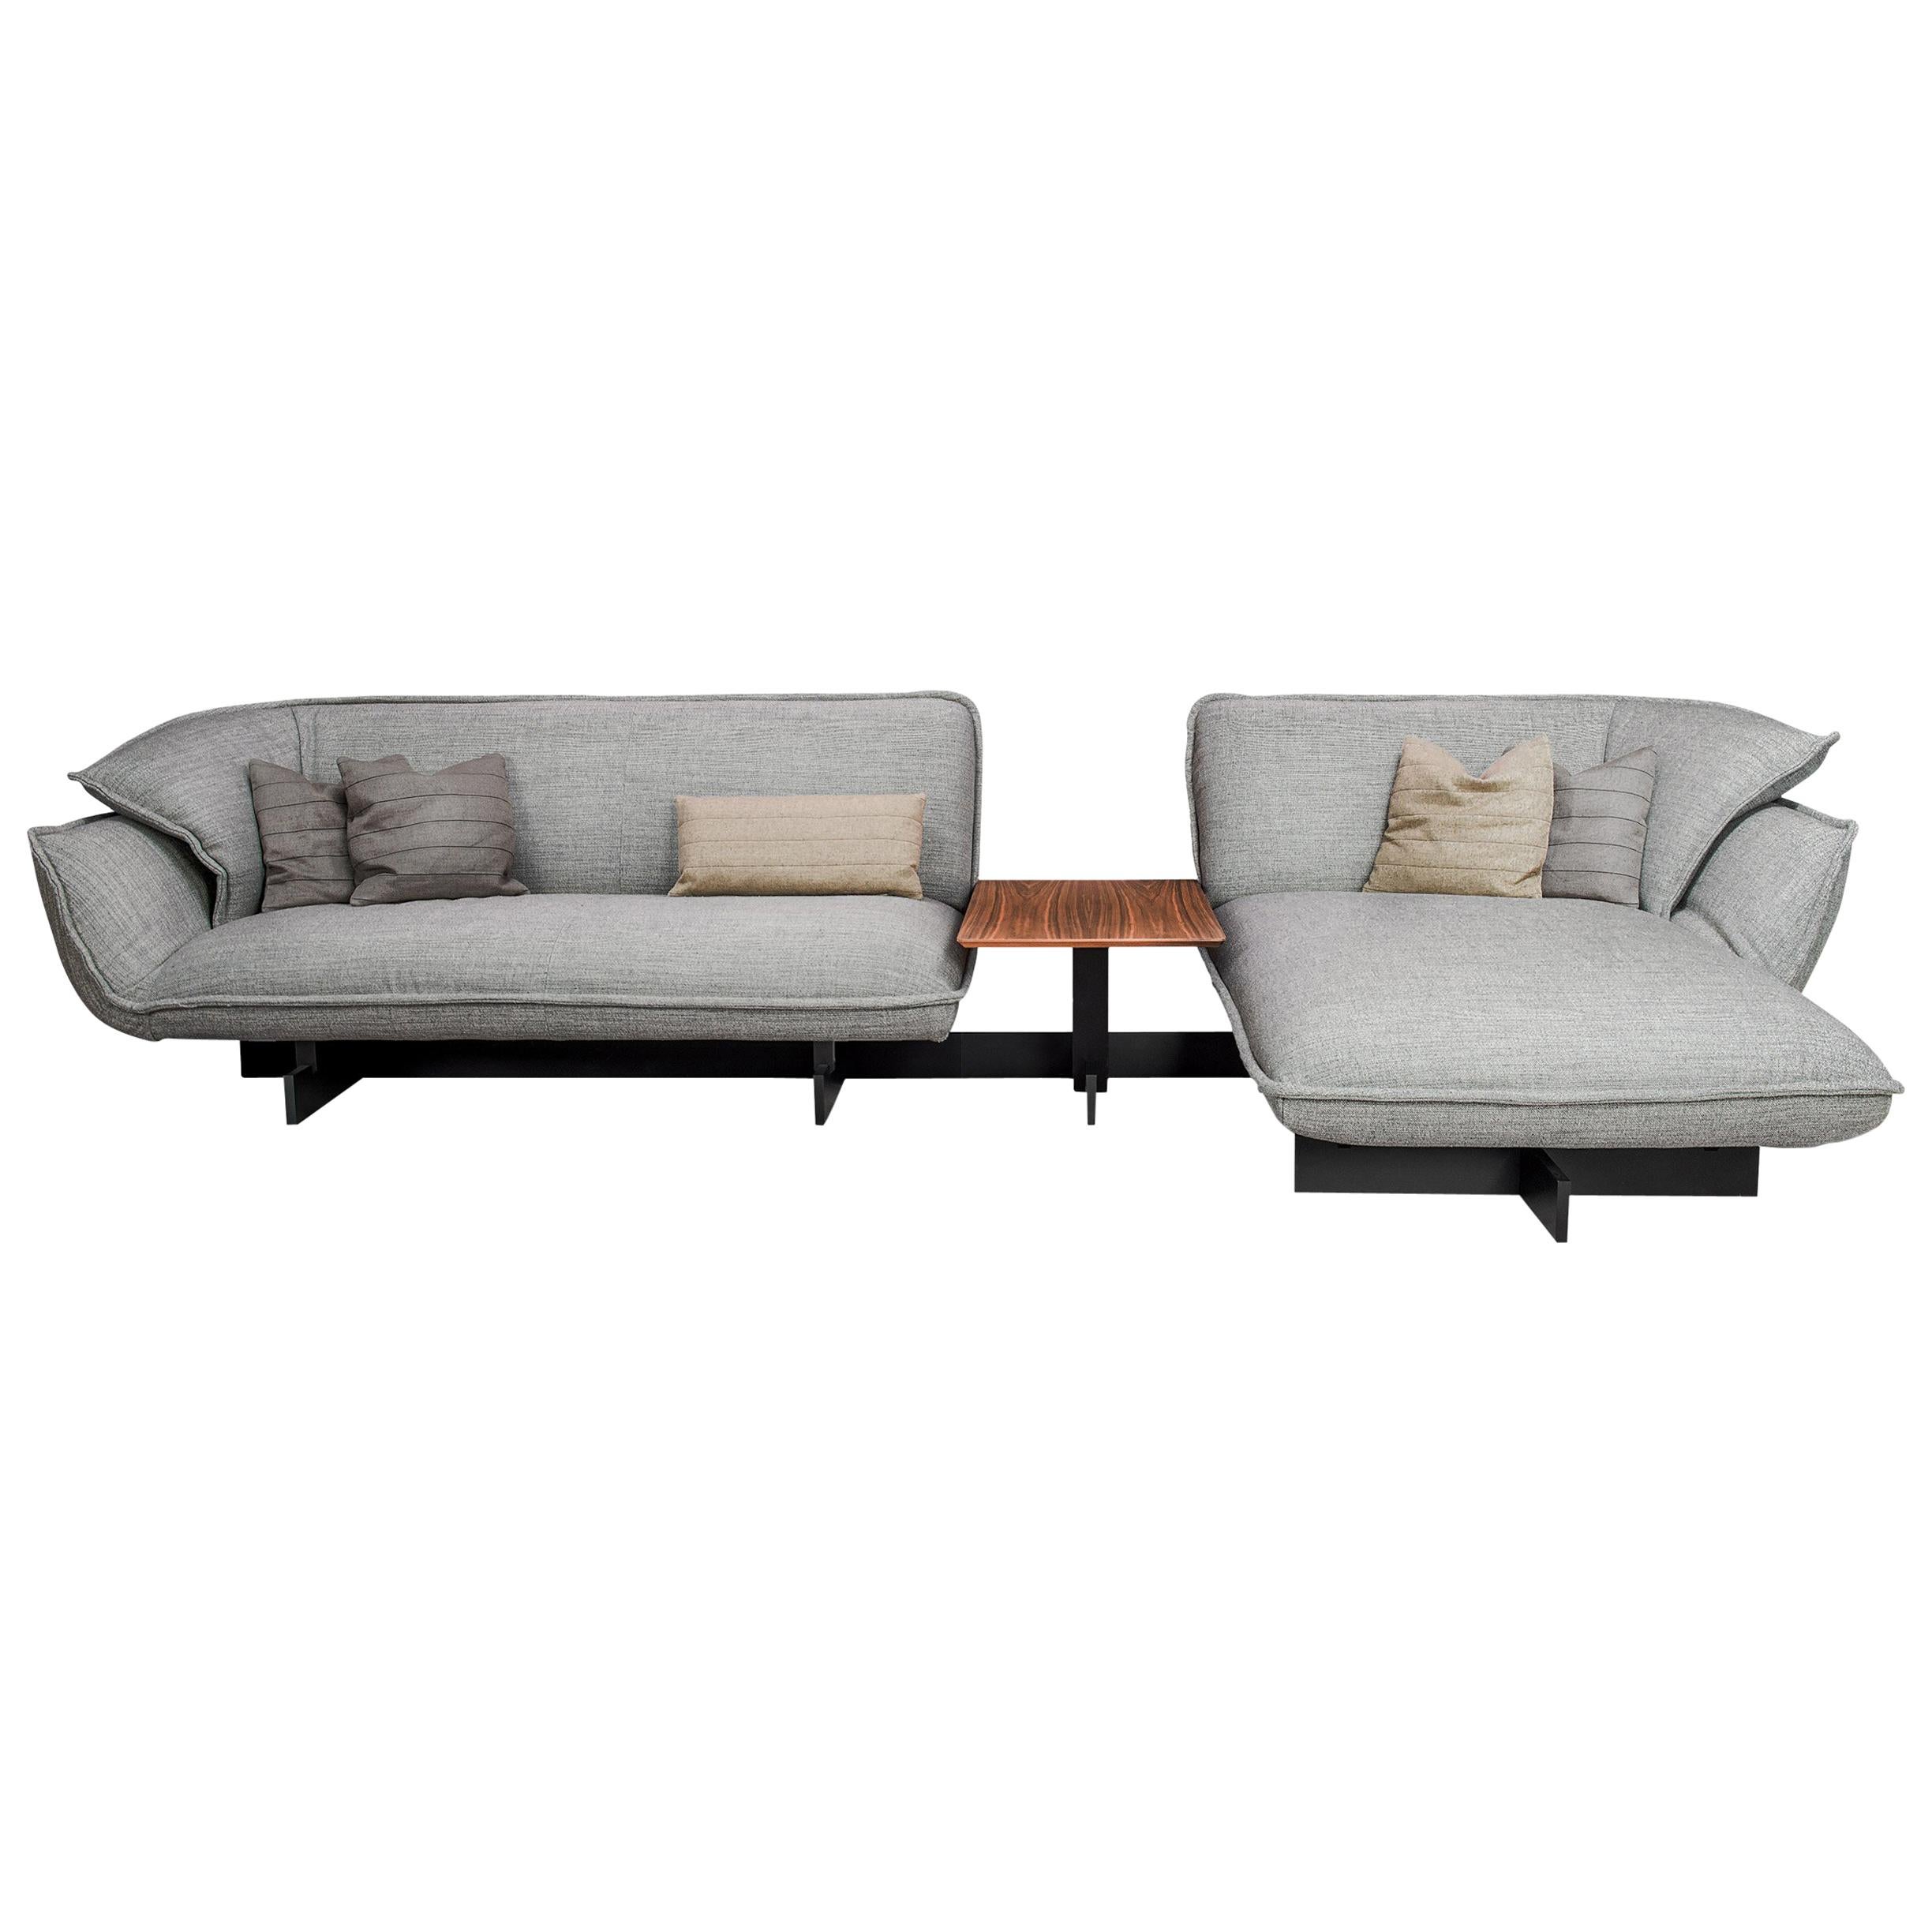 Grey Fabric Beam Sofa Sectional in Warm Grey with Pillows, Cassina 